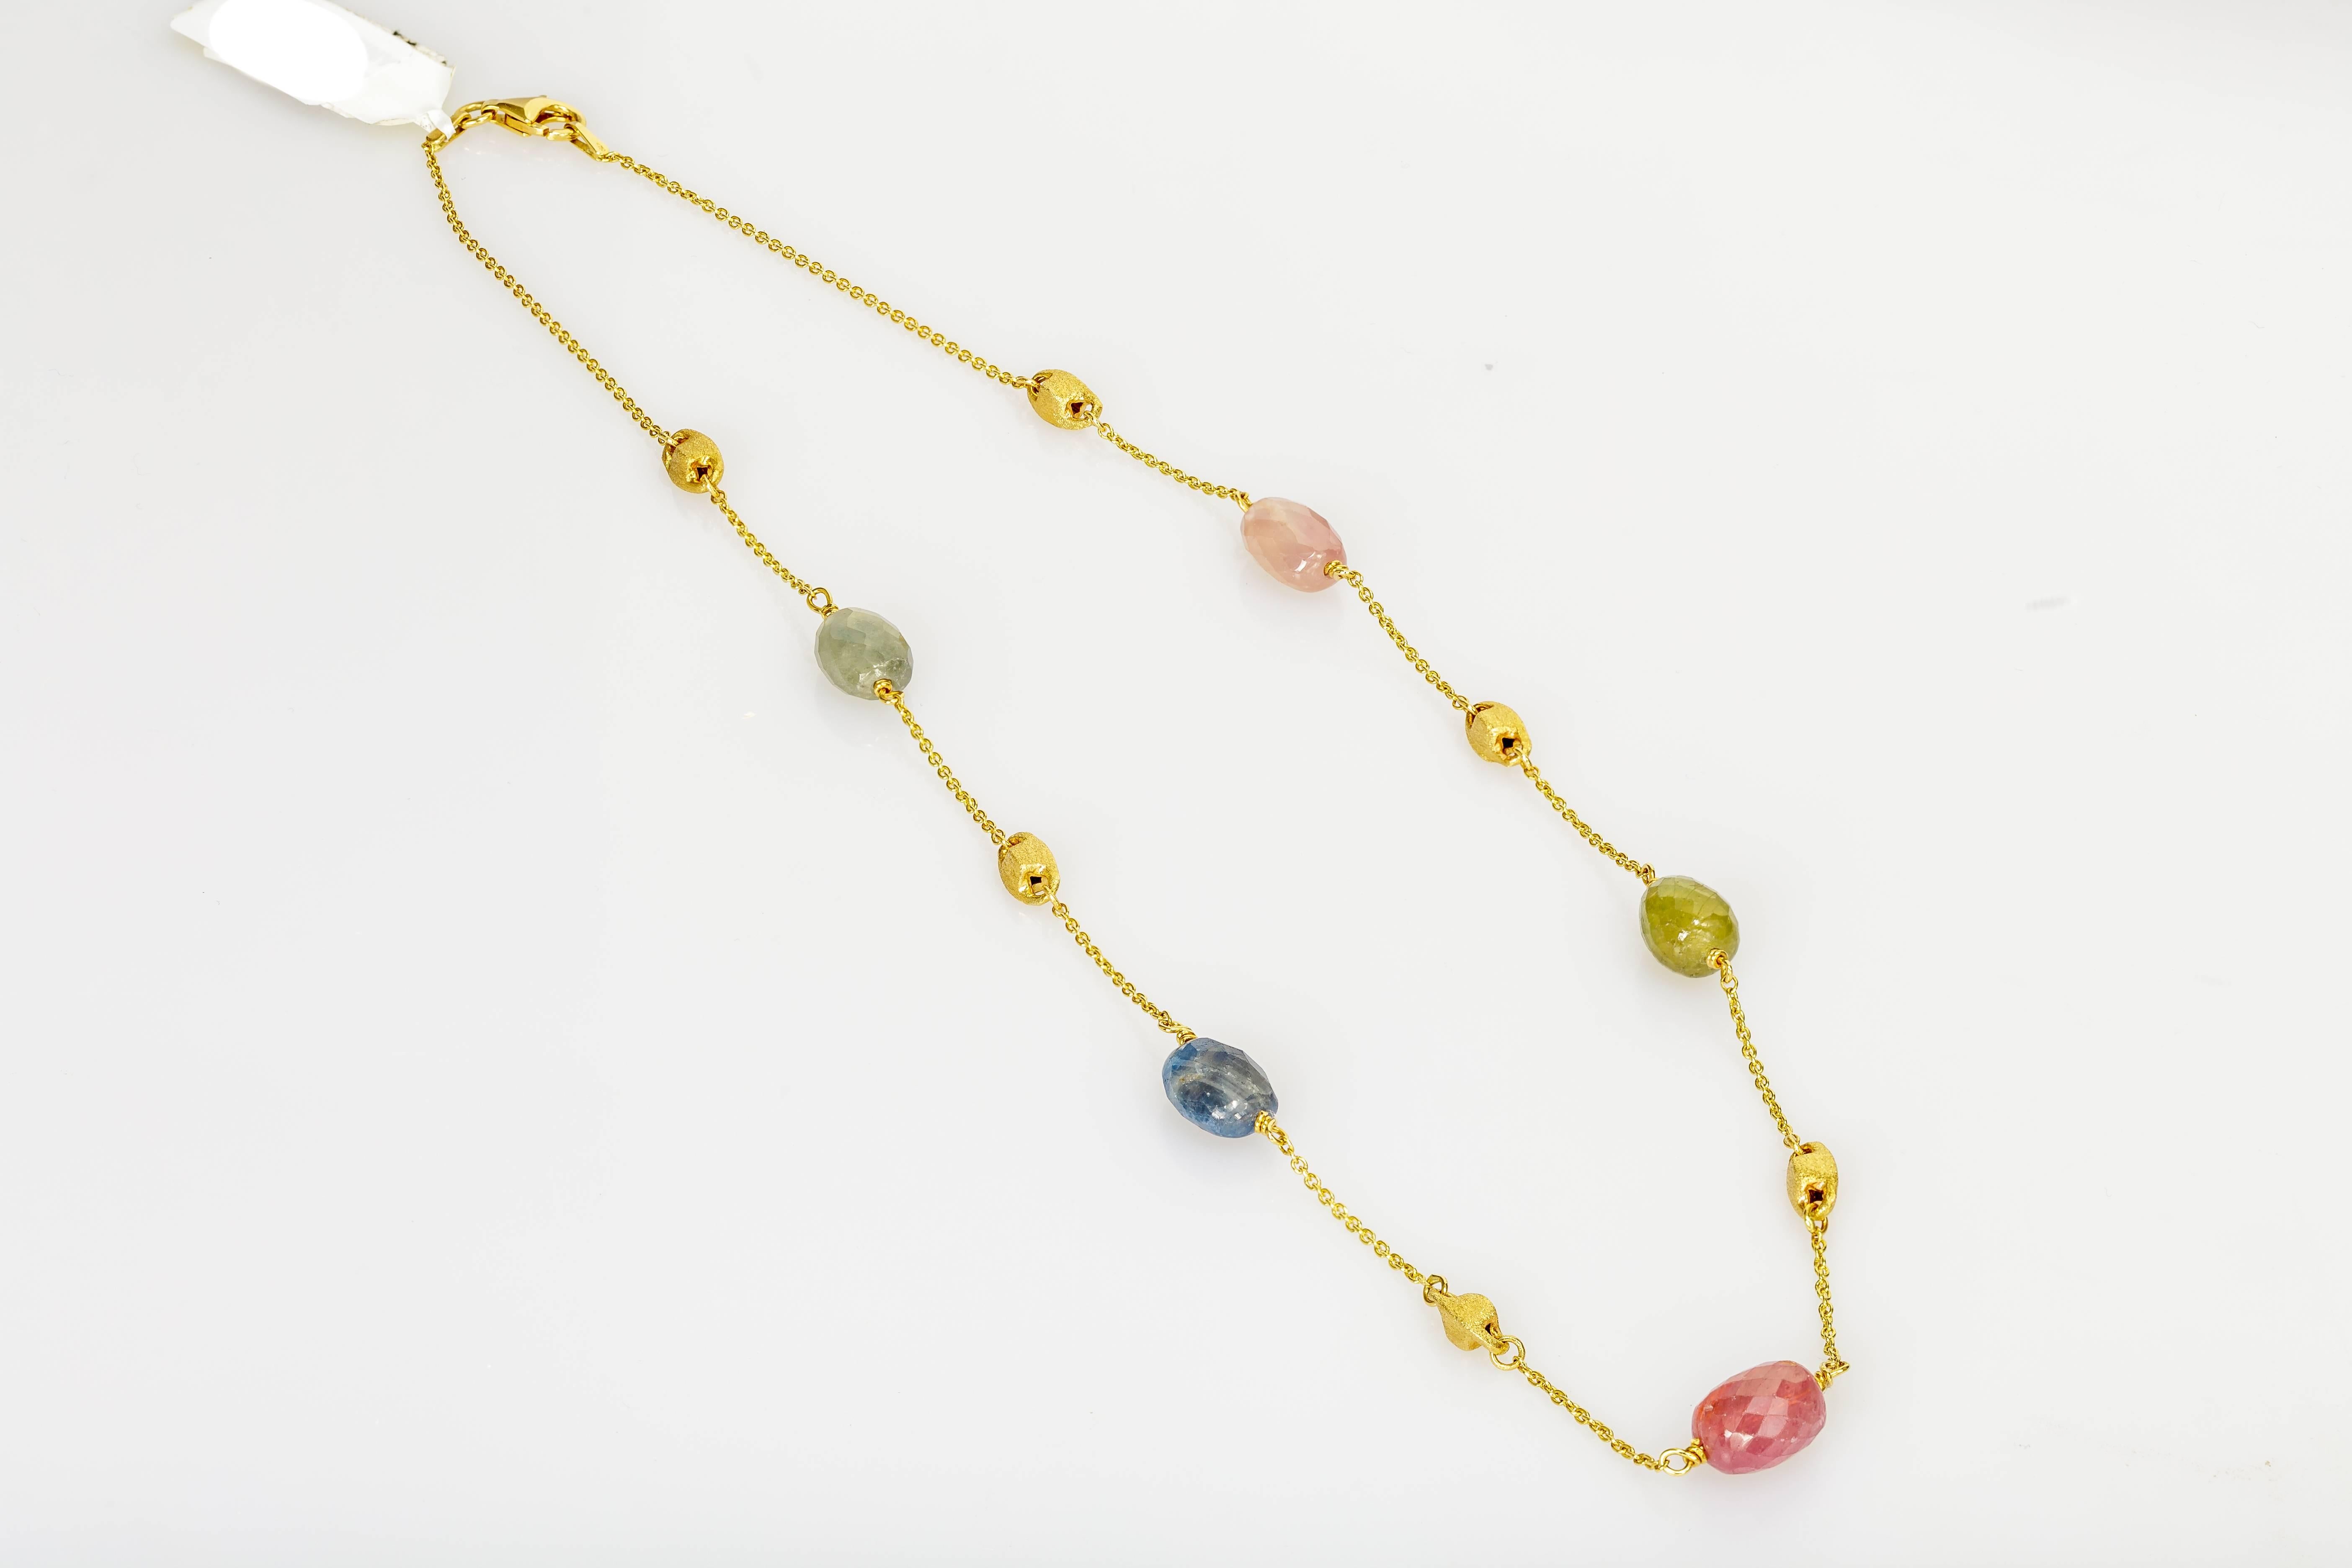 This Yvel necklace features five rose cut natural fancy colored sapphire beads on a 16 inch 18k yellow gold chain.